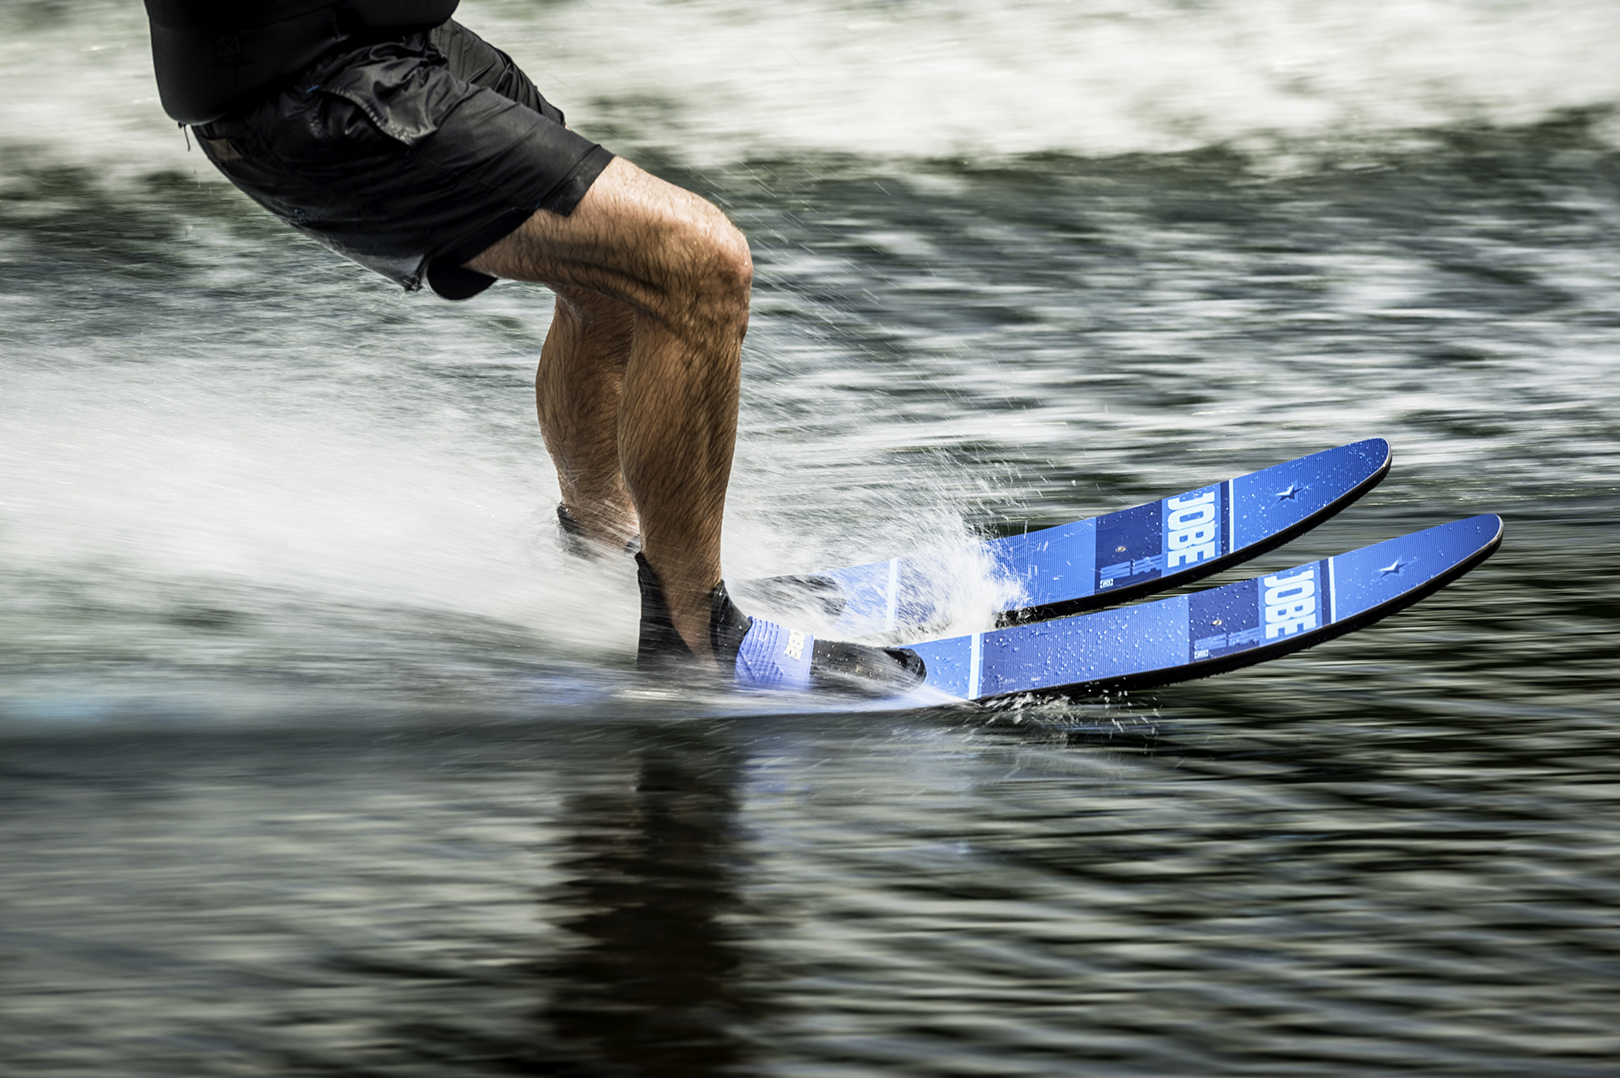 How-to-ski: The fundamentals of waterski